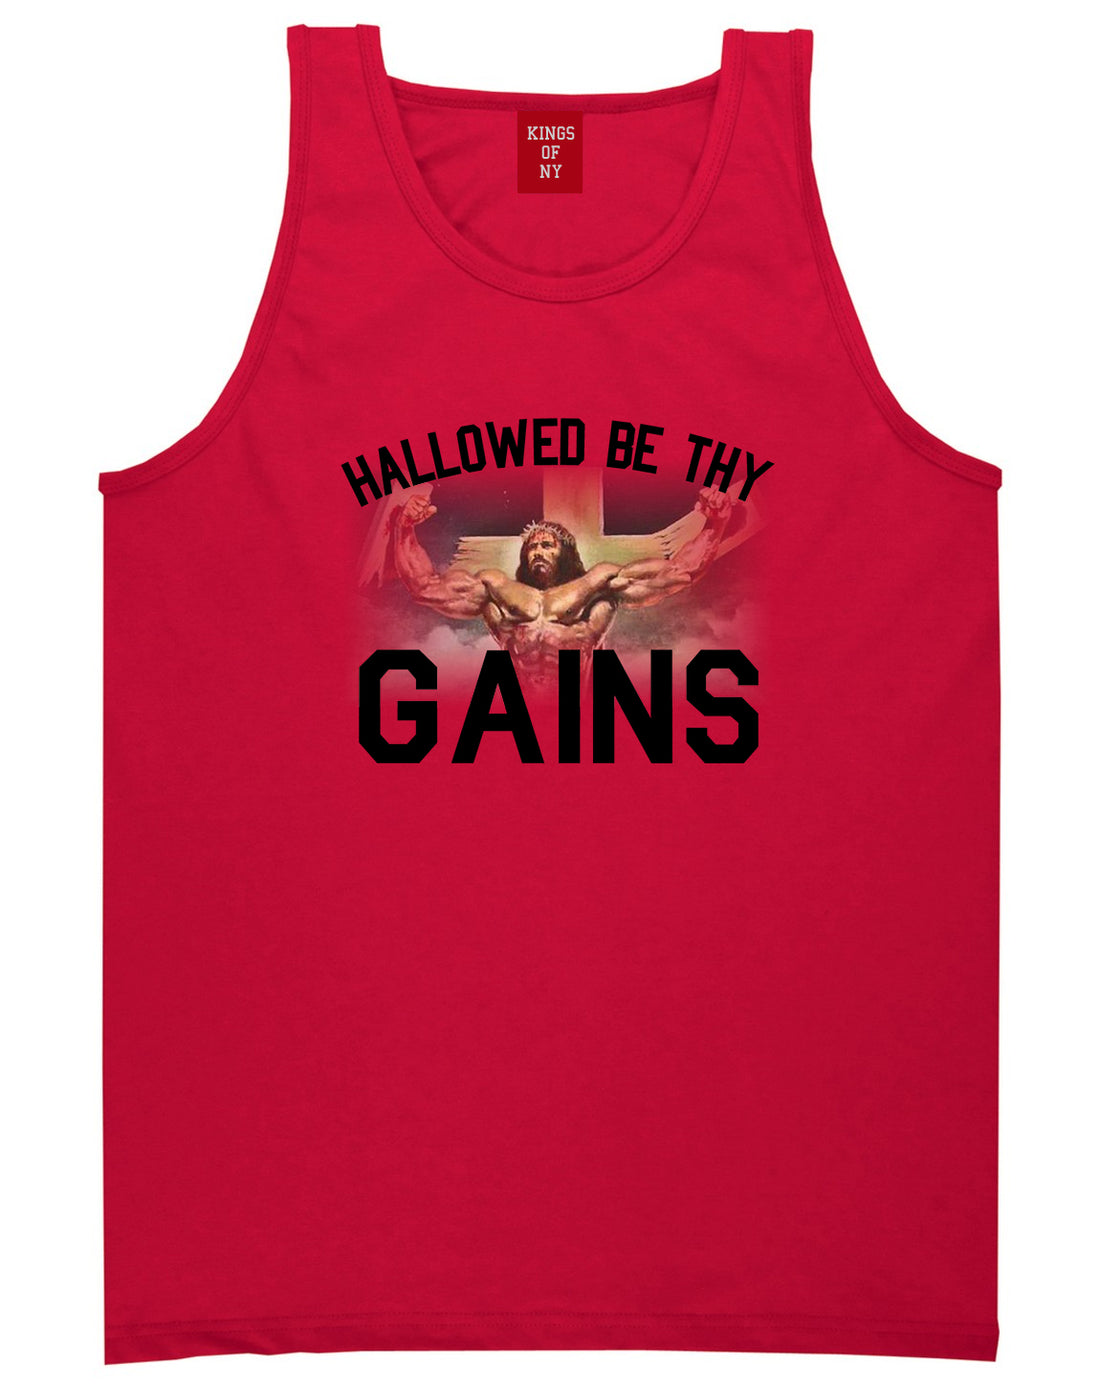 Hallowed Be Thy Gains Jesus Work Out Mens Tank Top Shirt Red